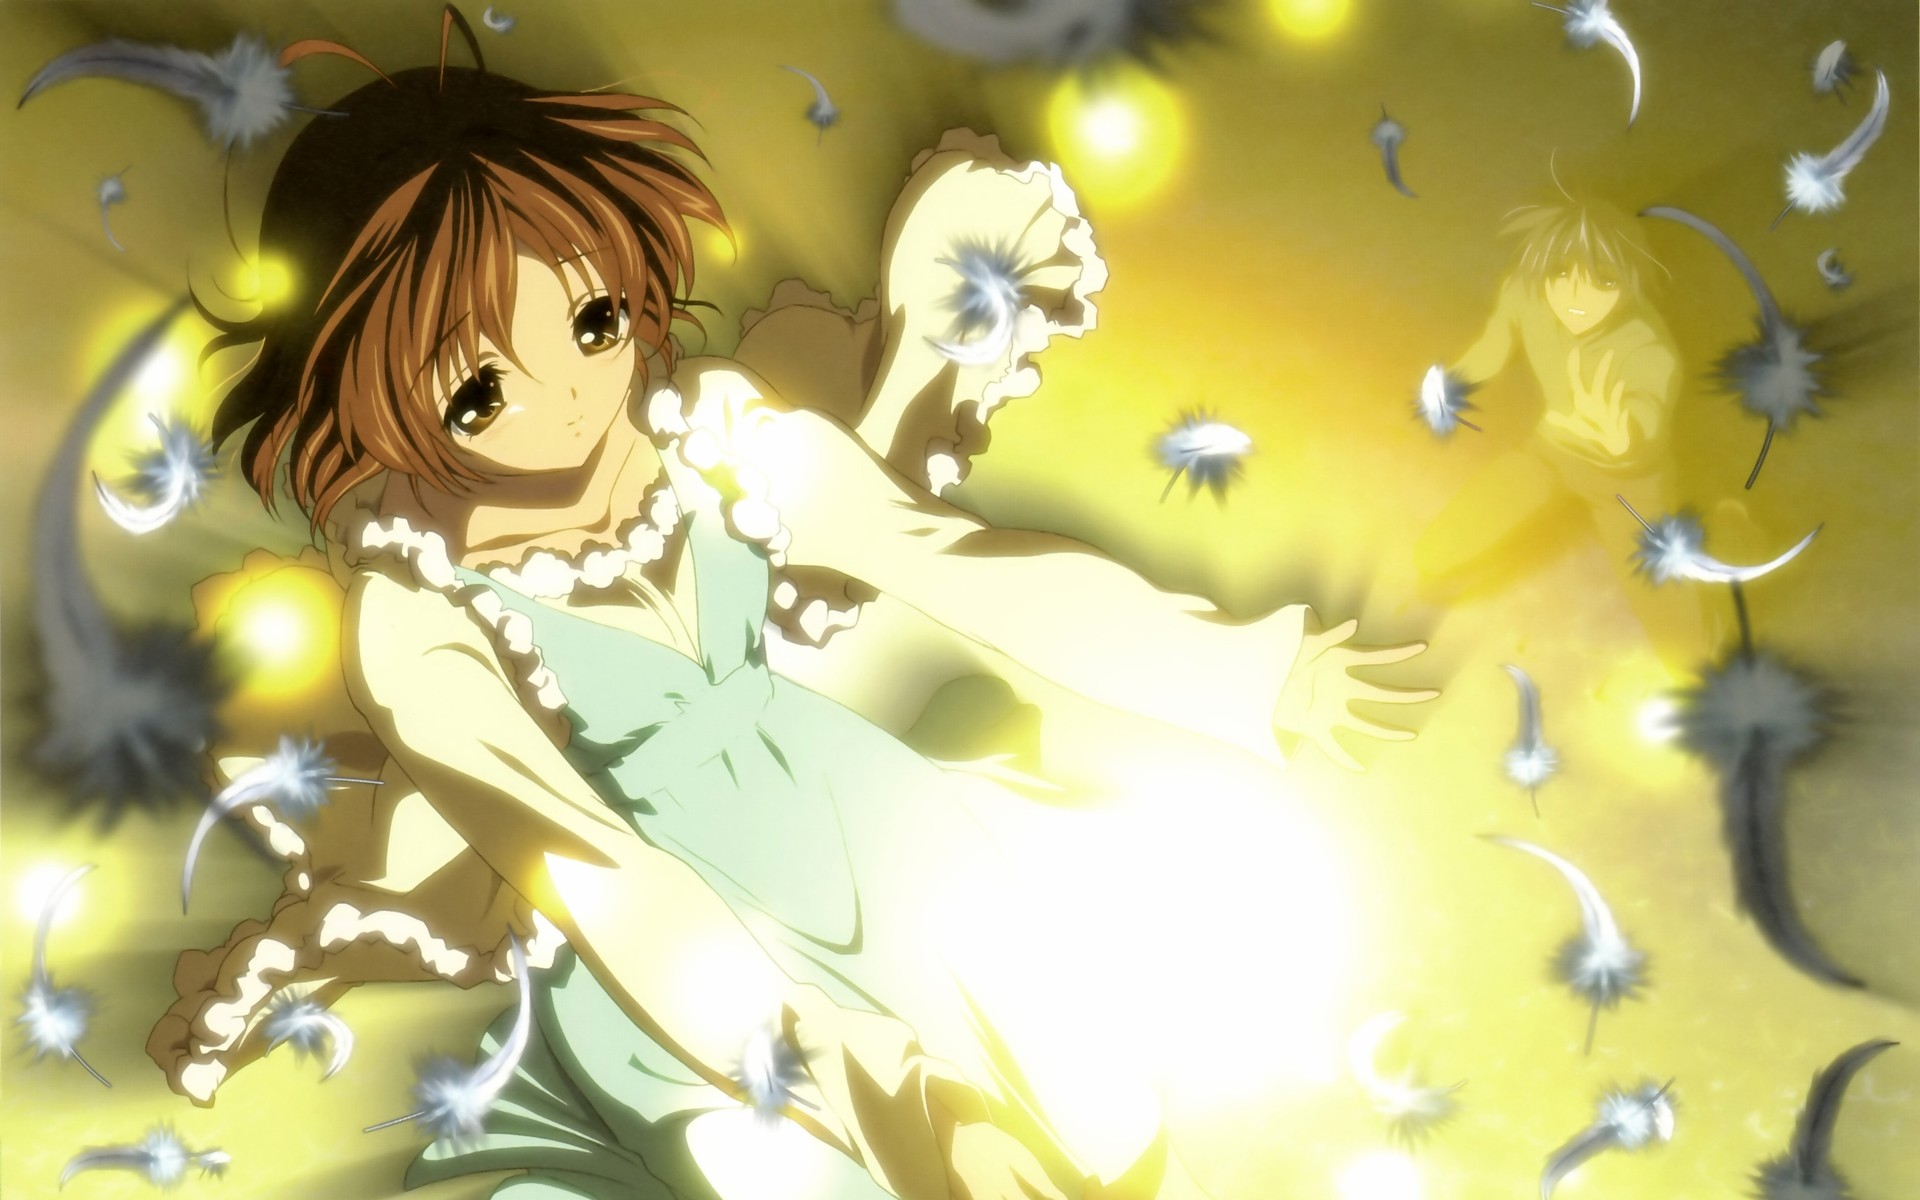 1920x1200 DestinyGirl images The Light of the Other World HD wallpaper and background  photos